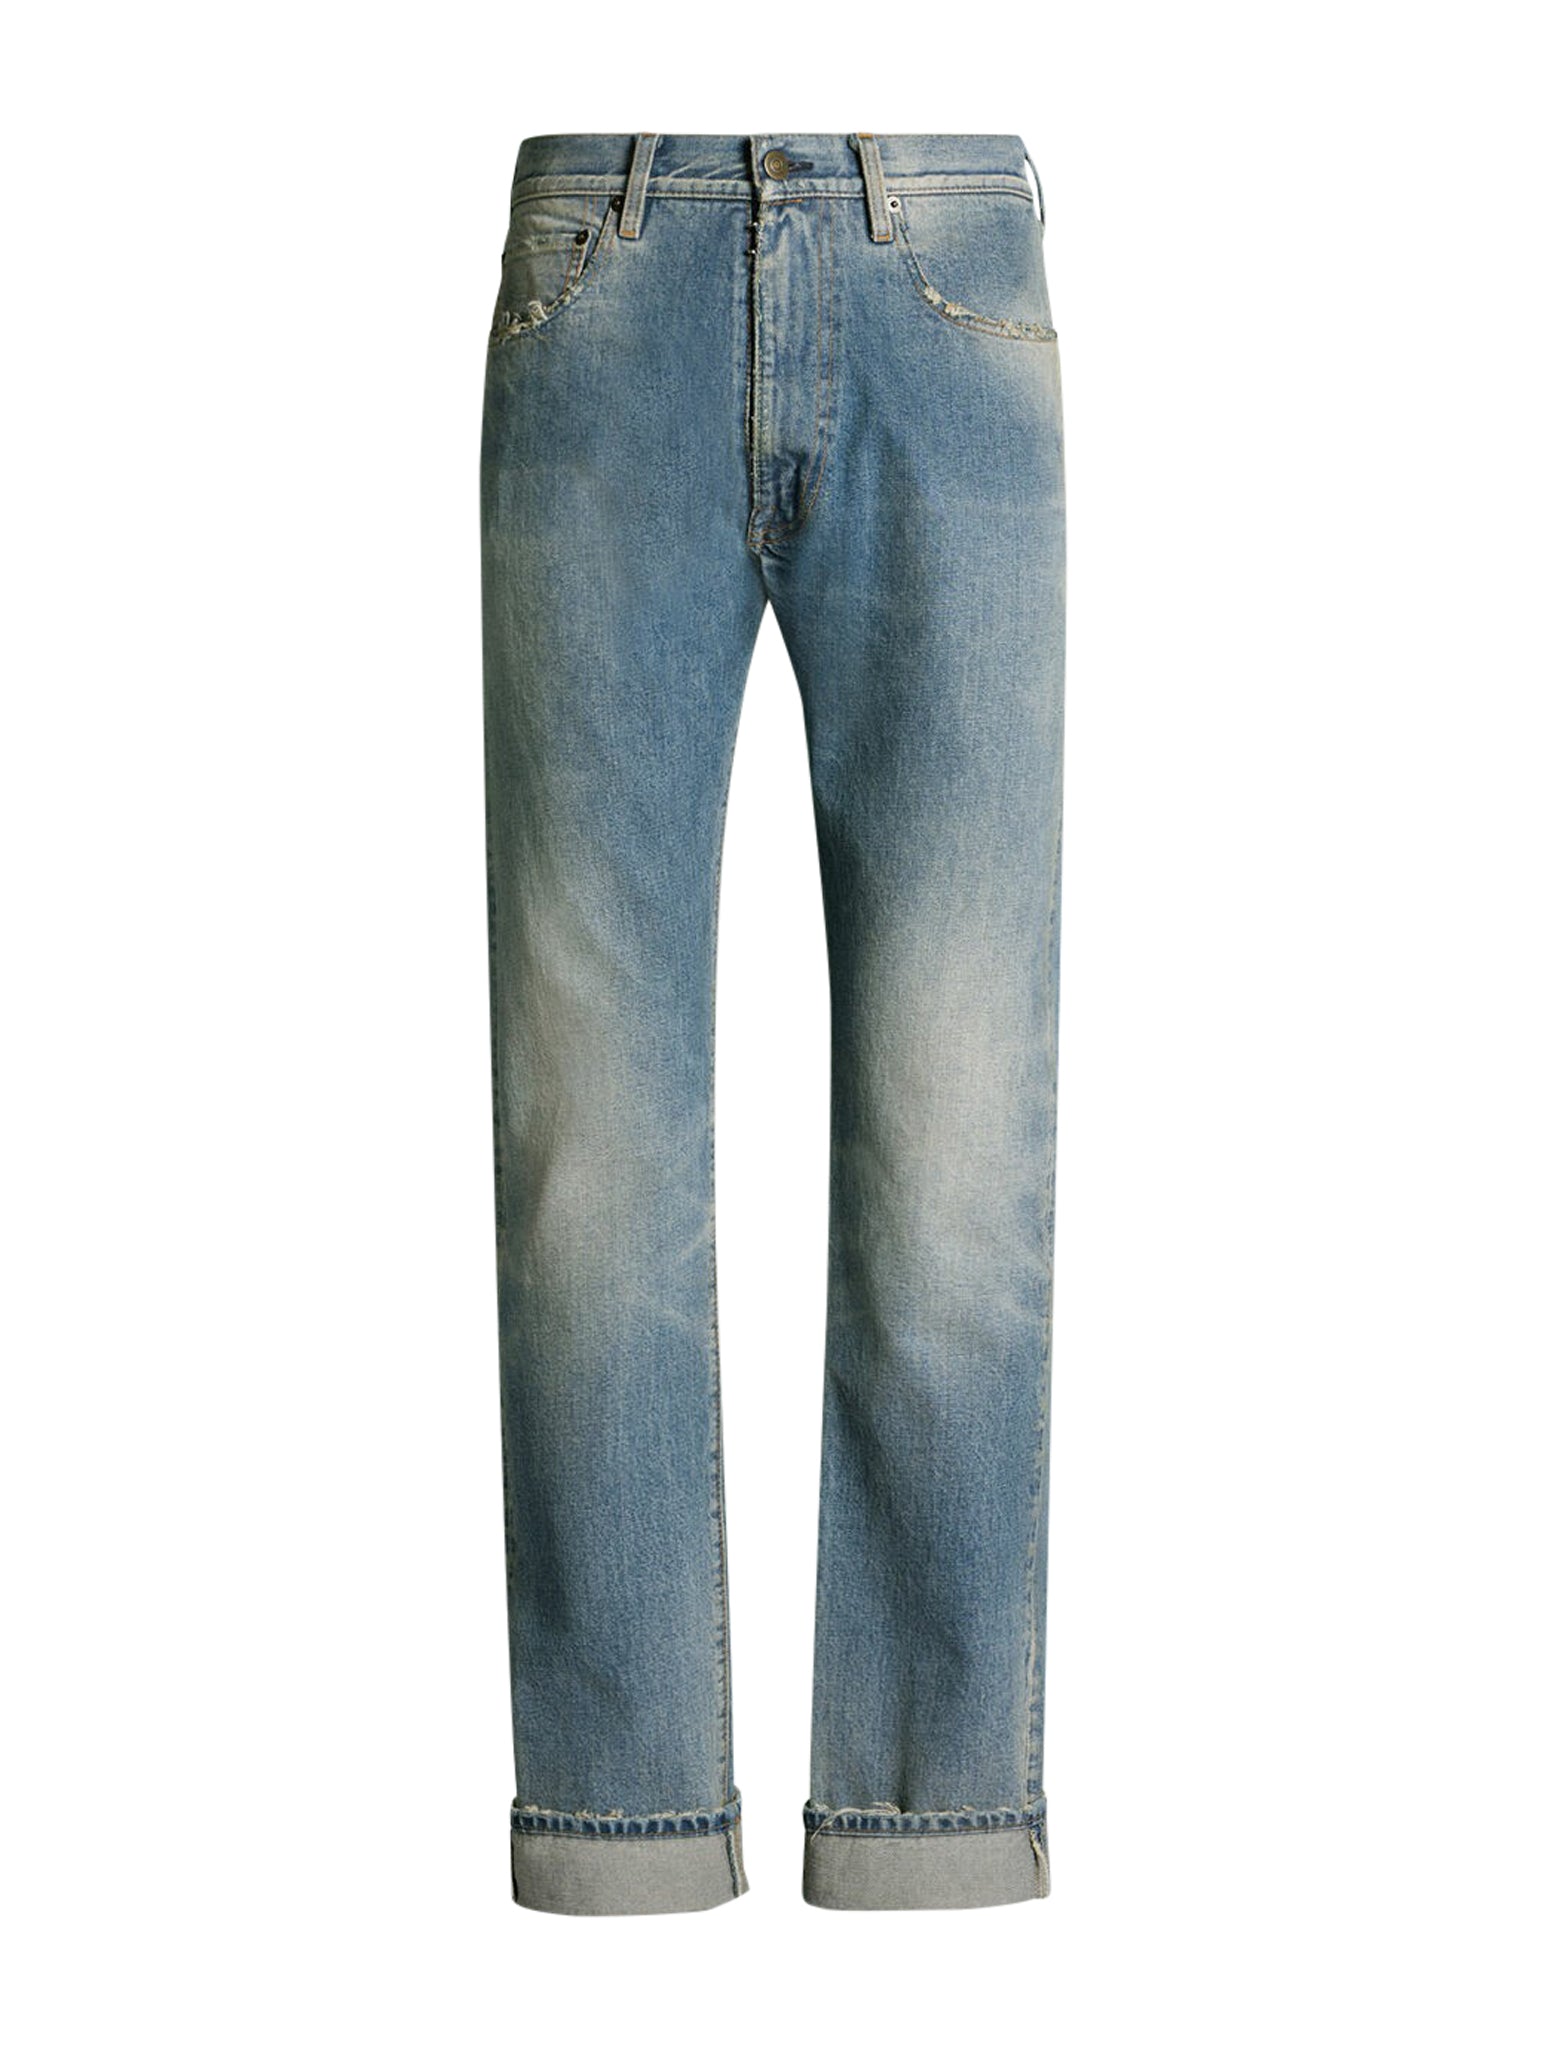 Ankle-length straight jeans